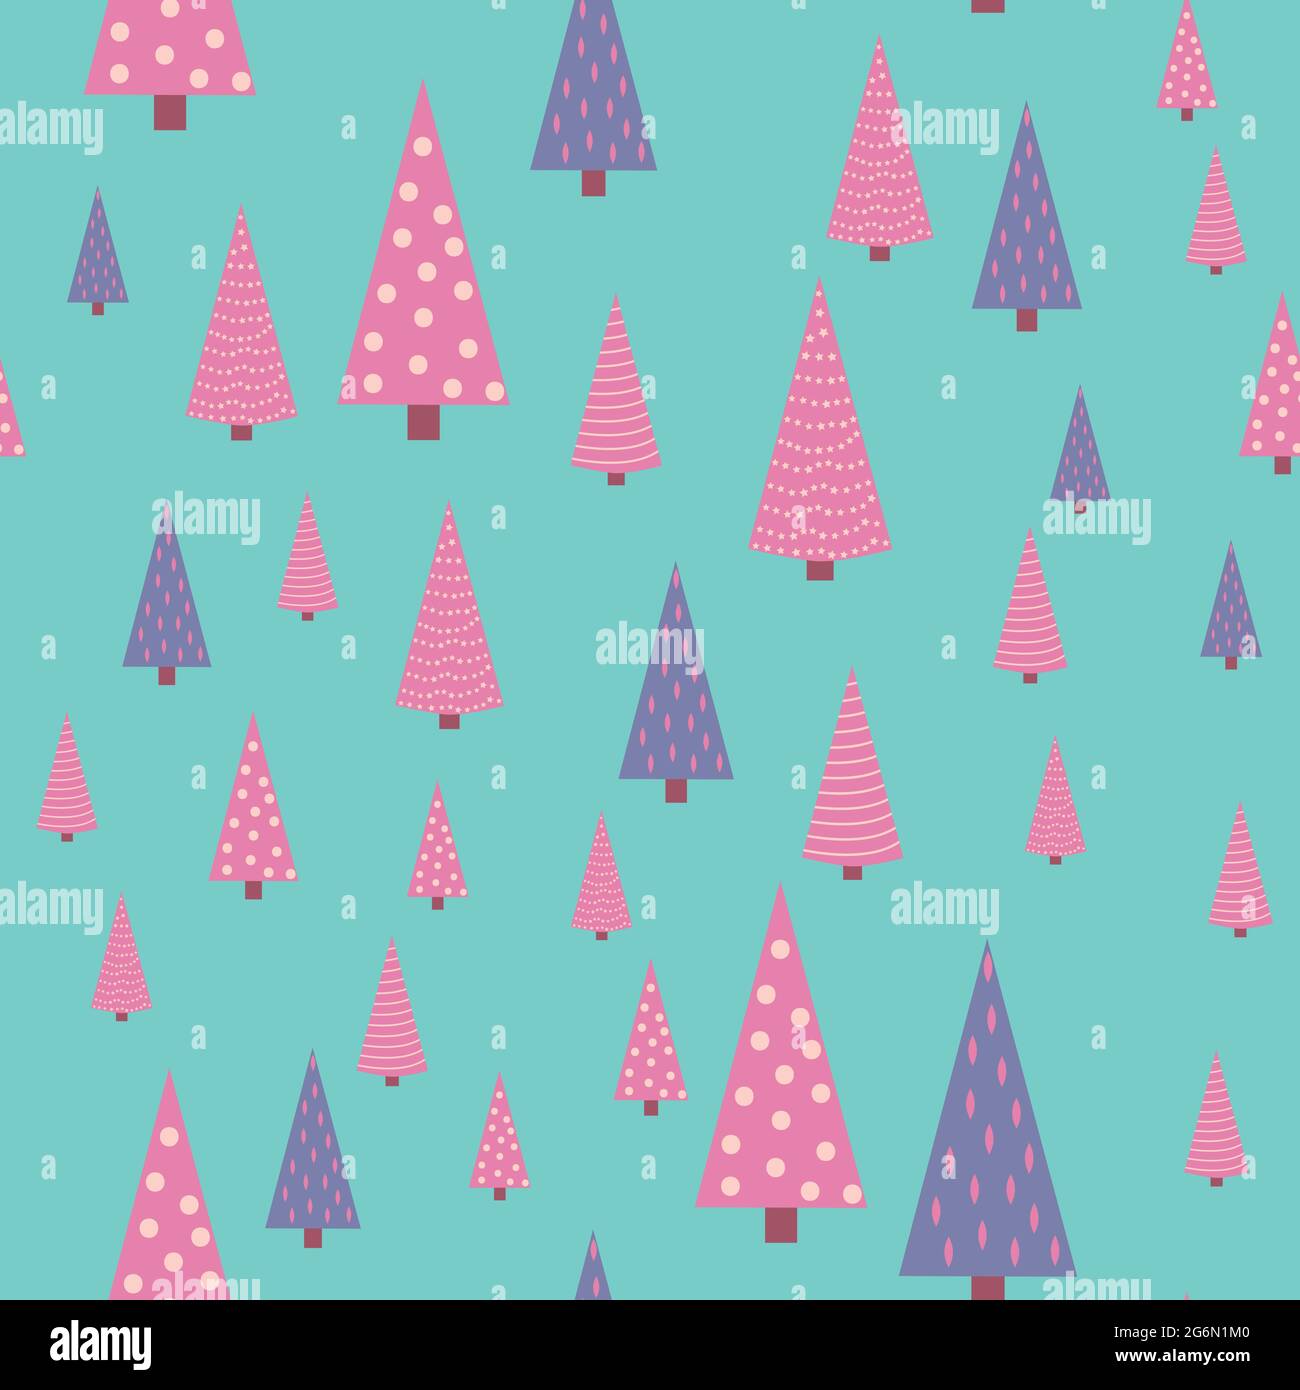 Seamless repeating pattern with textured Christmas trees in violet, pastel pink colors on gray, blue, turquoise. Modern and original holiday textiles, Stock Vector